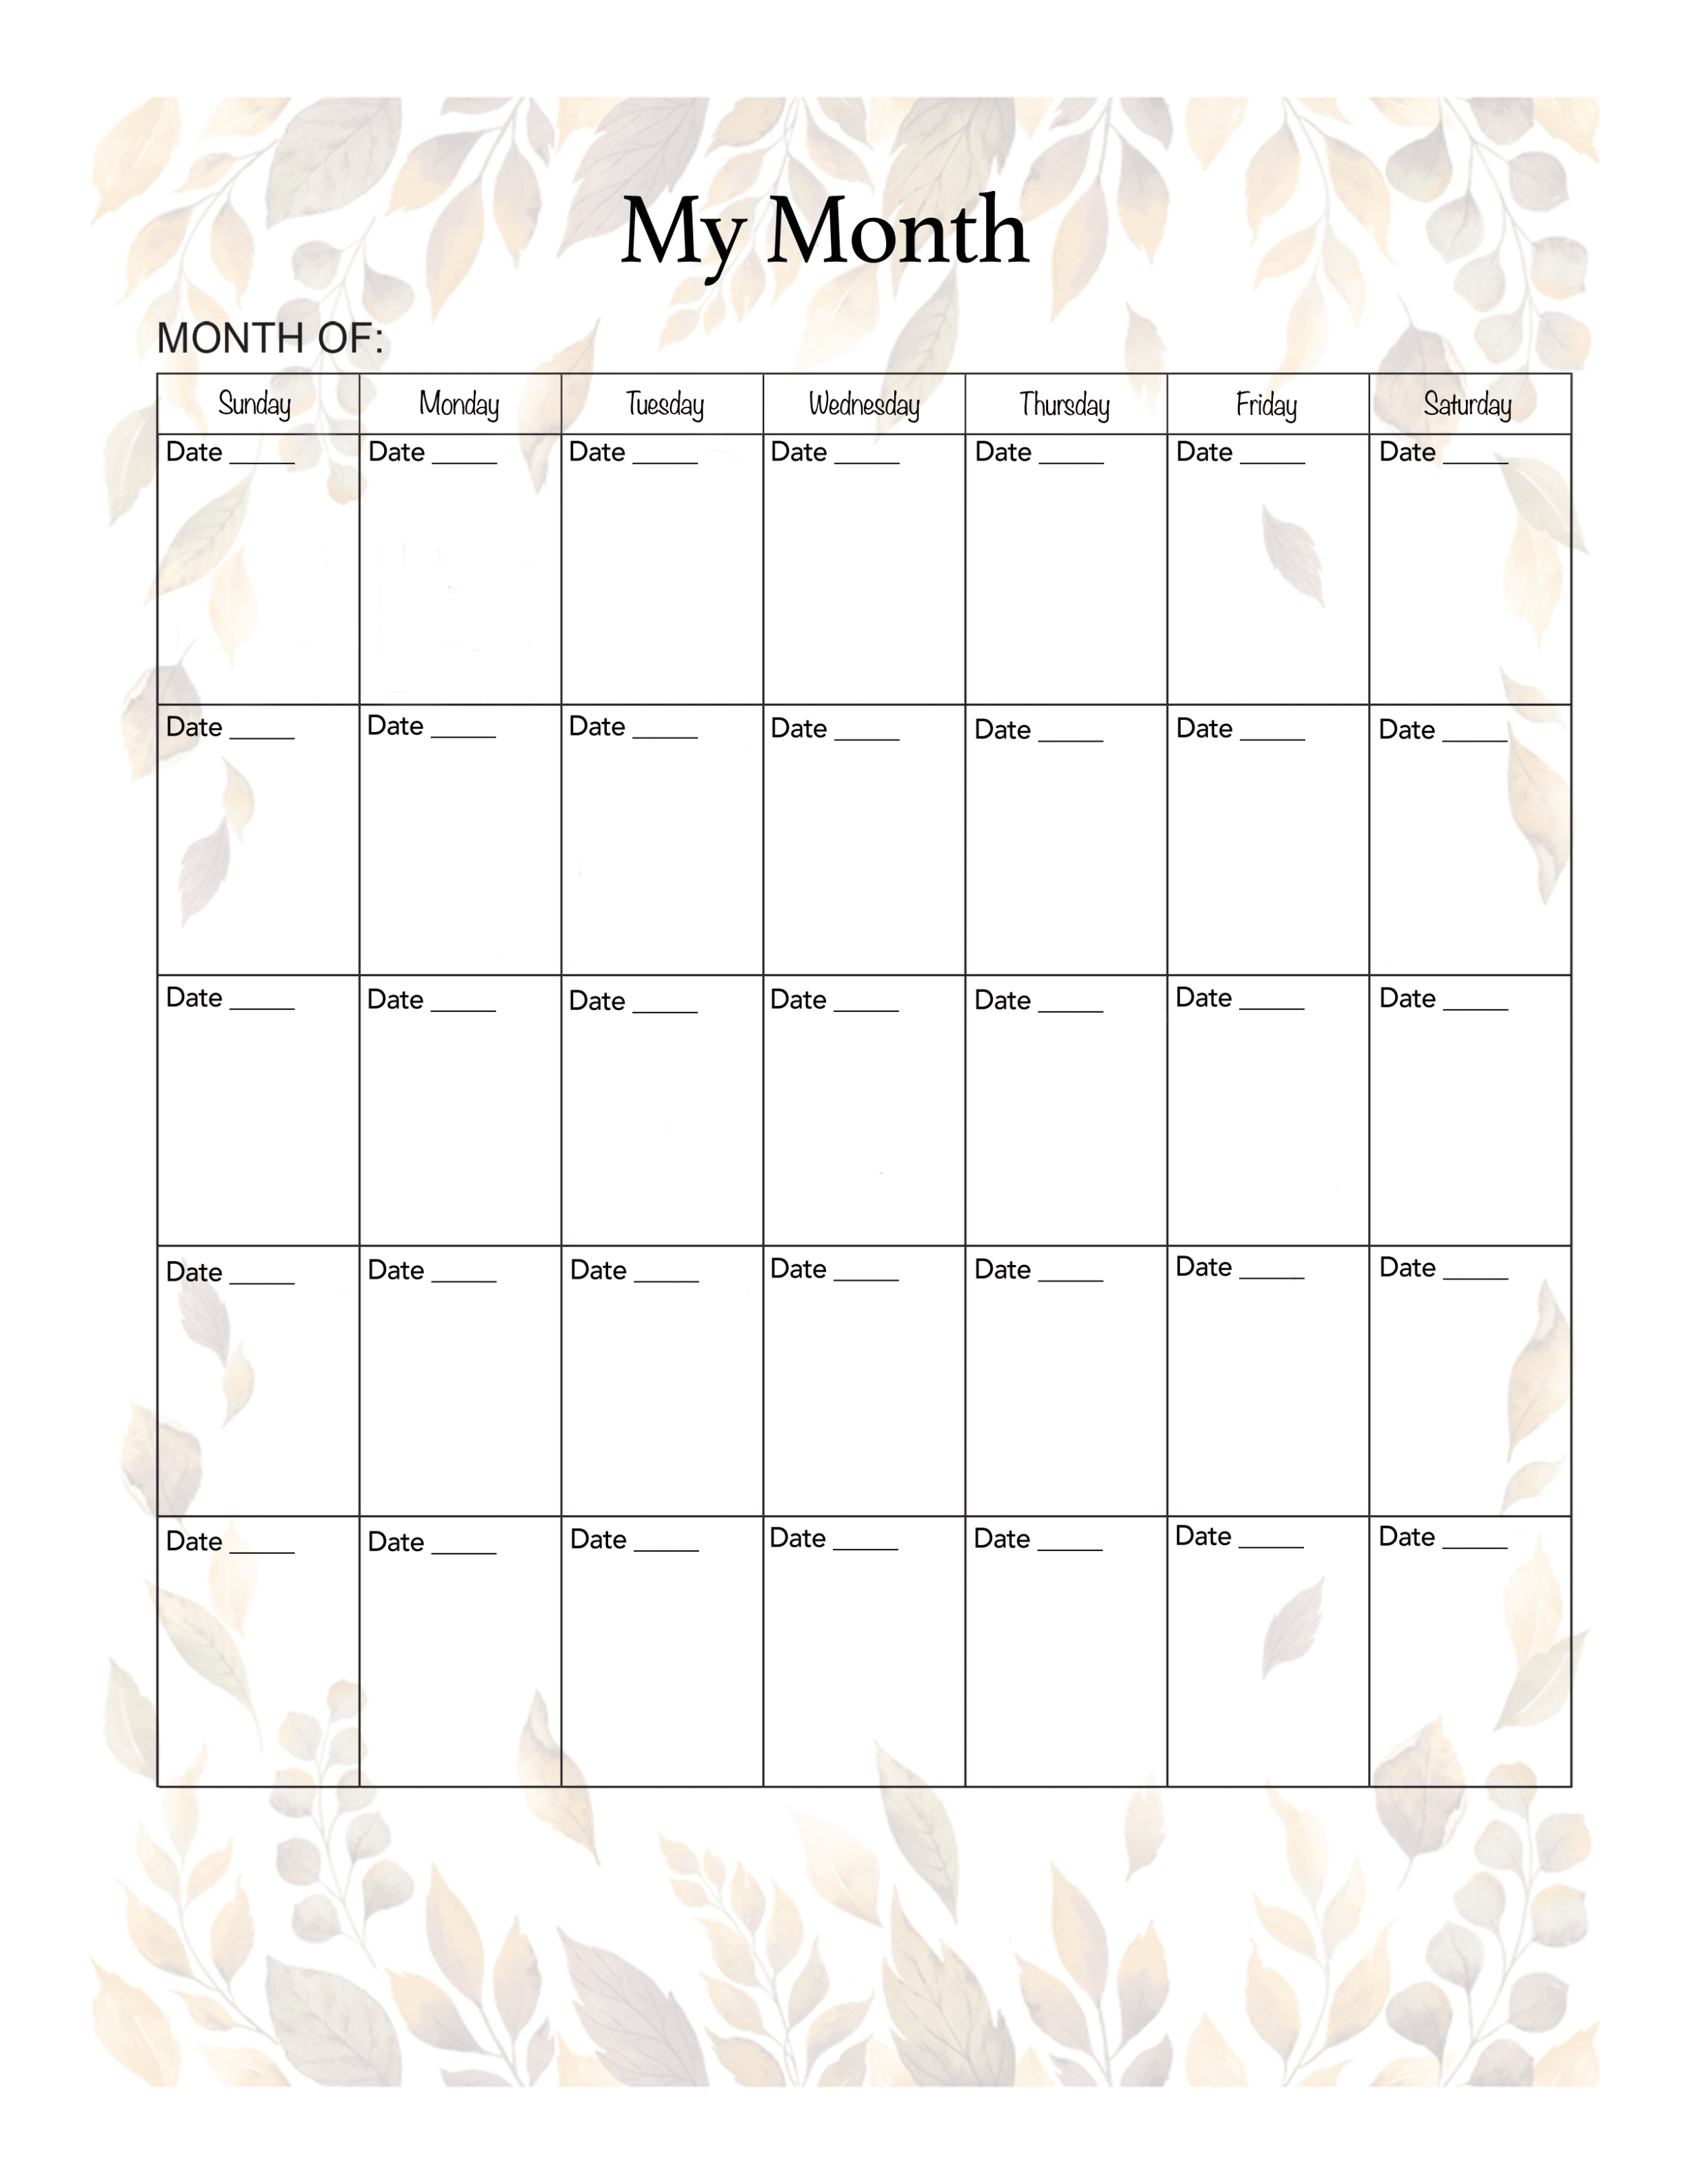 Example of monthly page